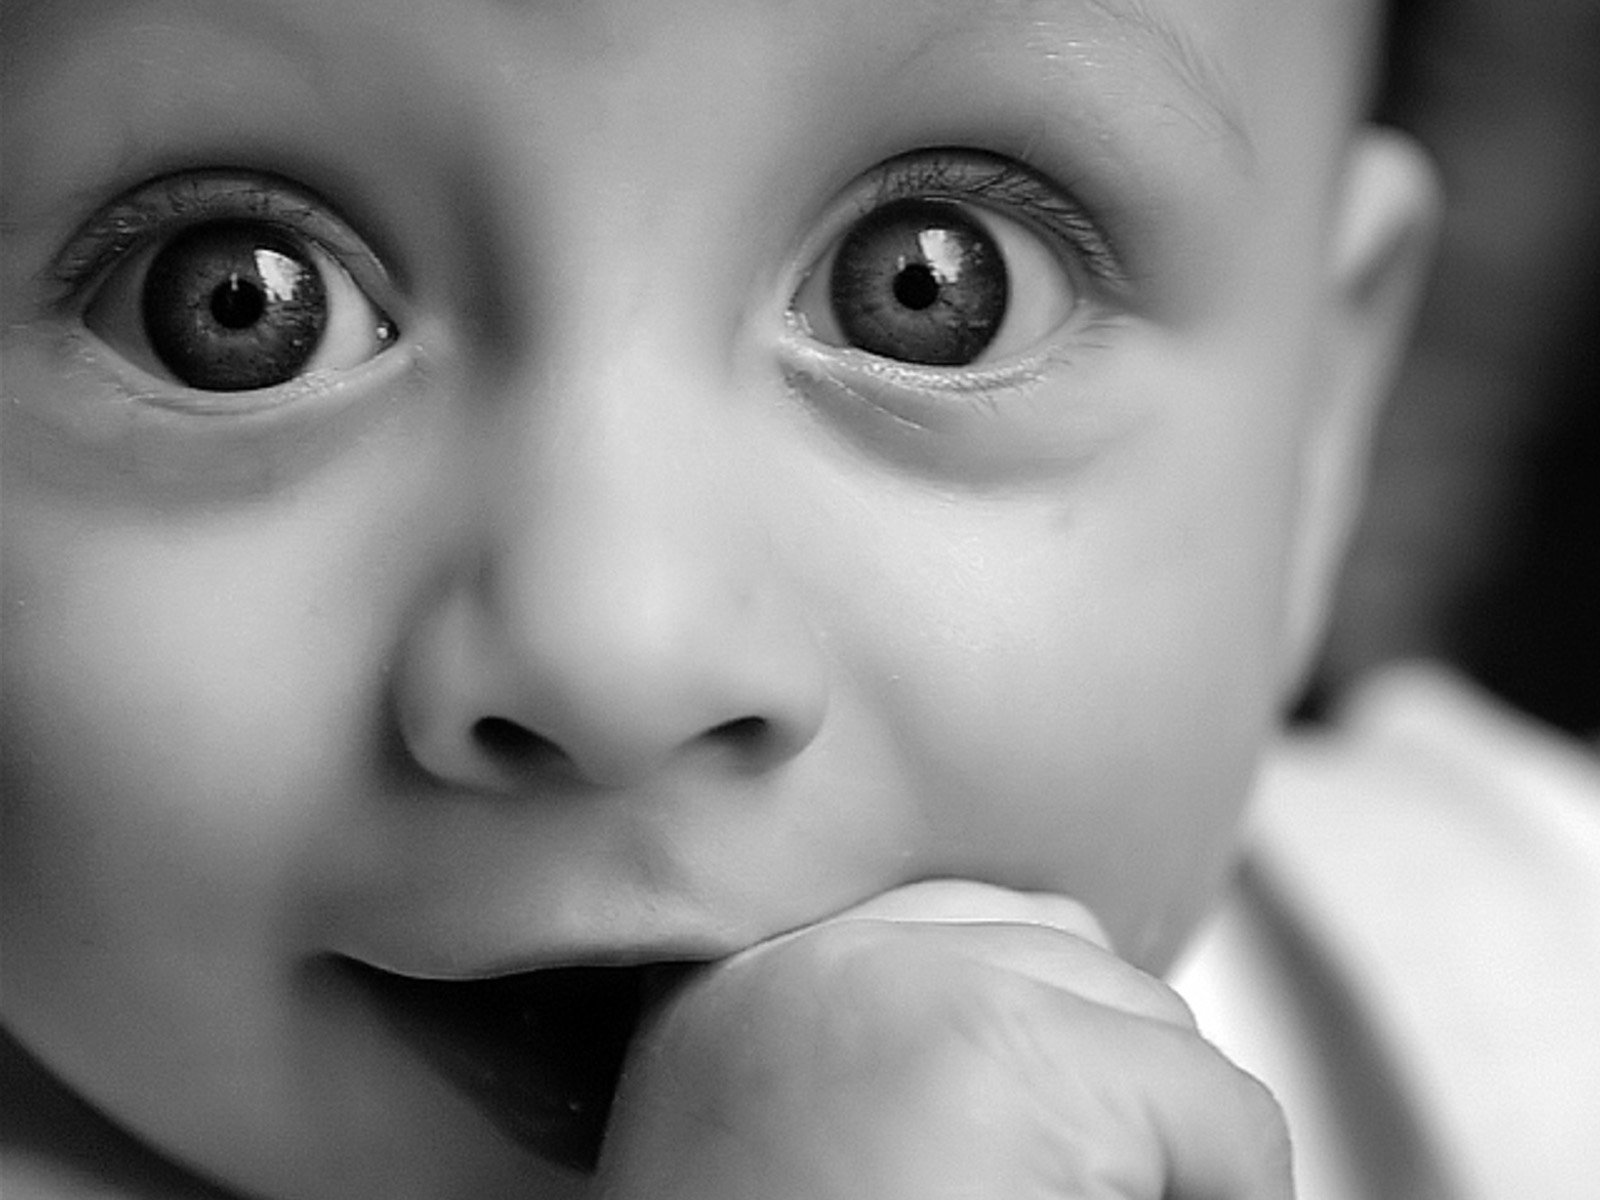 Baby Eyes Black And White - HD Wallpaper 